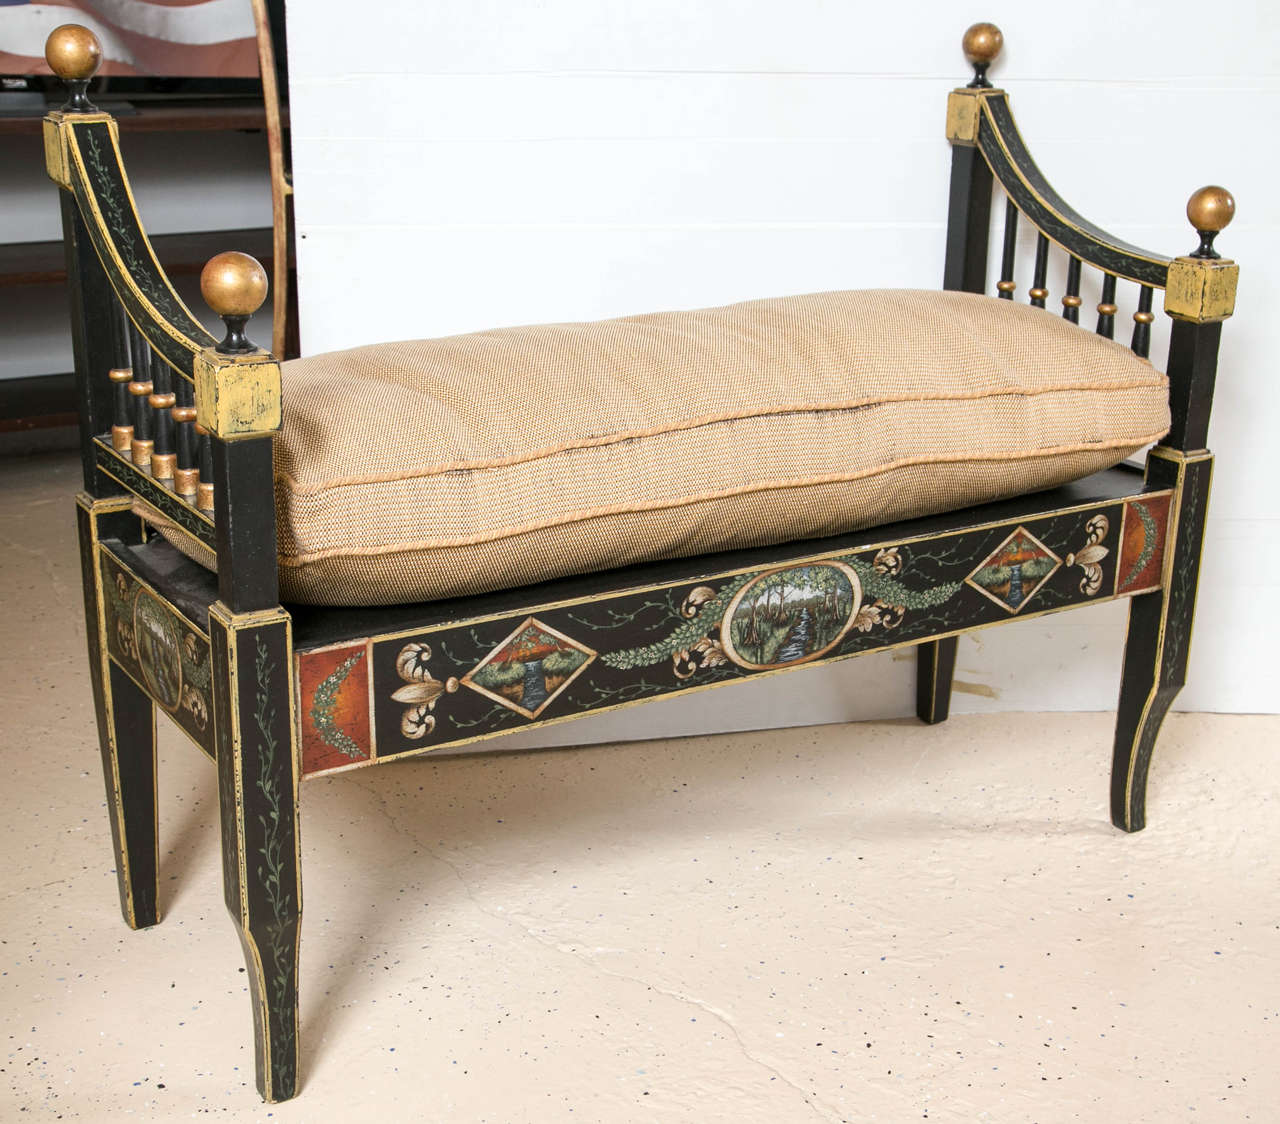 Pair of Hollywood Regency style ebonized and paint decorated benches. The curved and gilt gold decorated ebonized feet supporting an upper sitting bench with a finely paint decorated apron. The center of the apron having a stream in a forest with